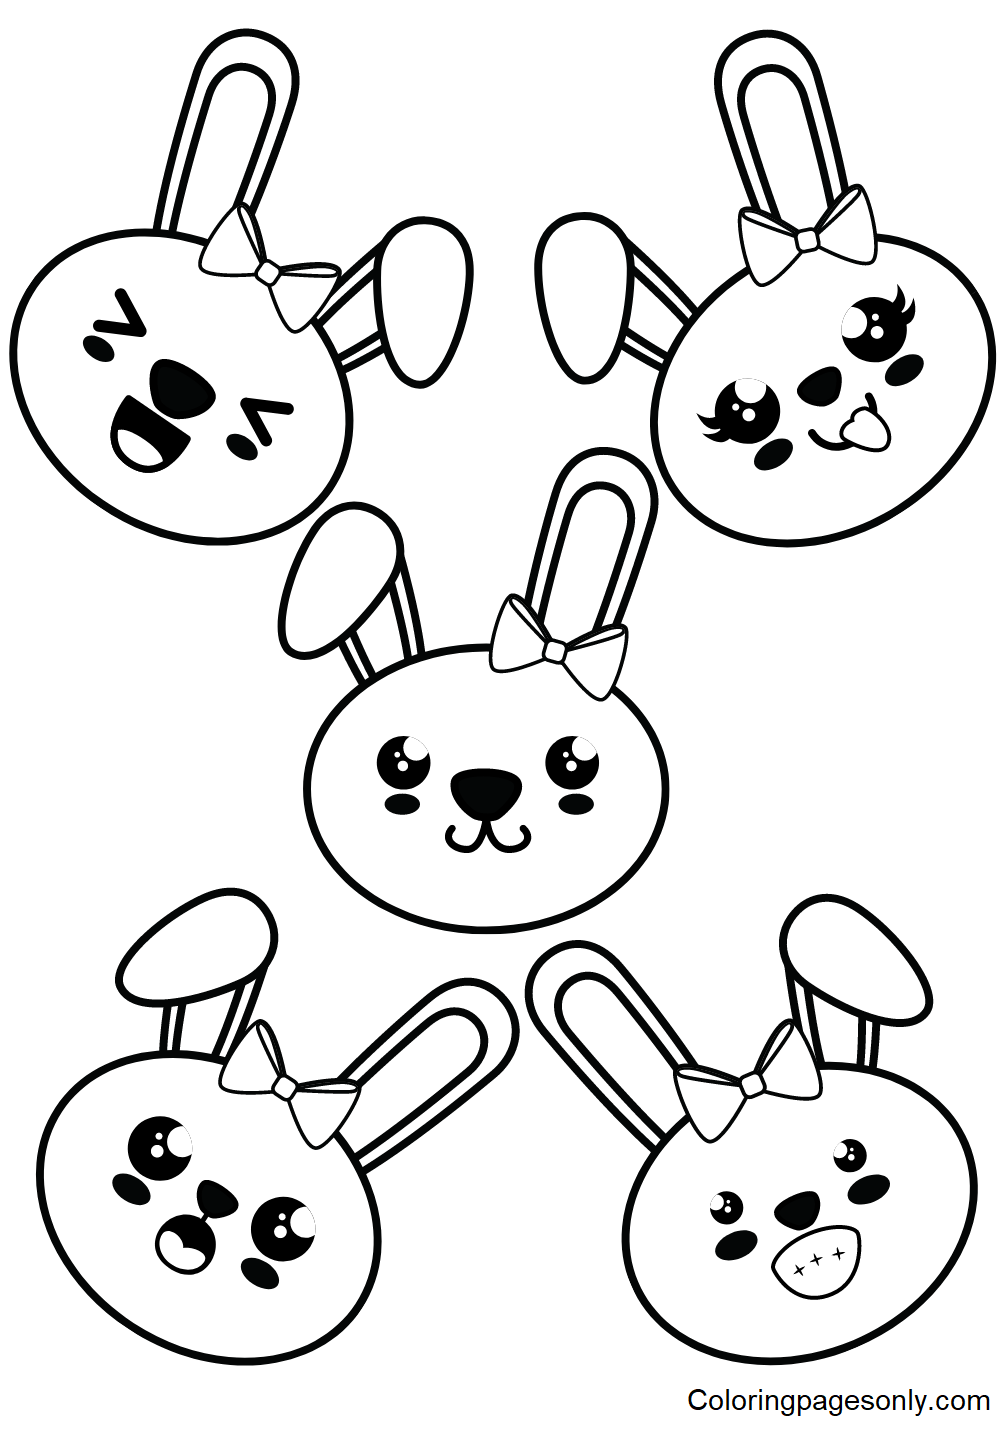 Bunny Stickers Coloring Pages